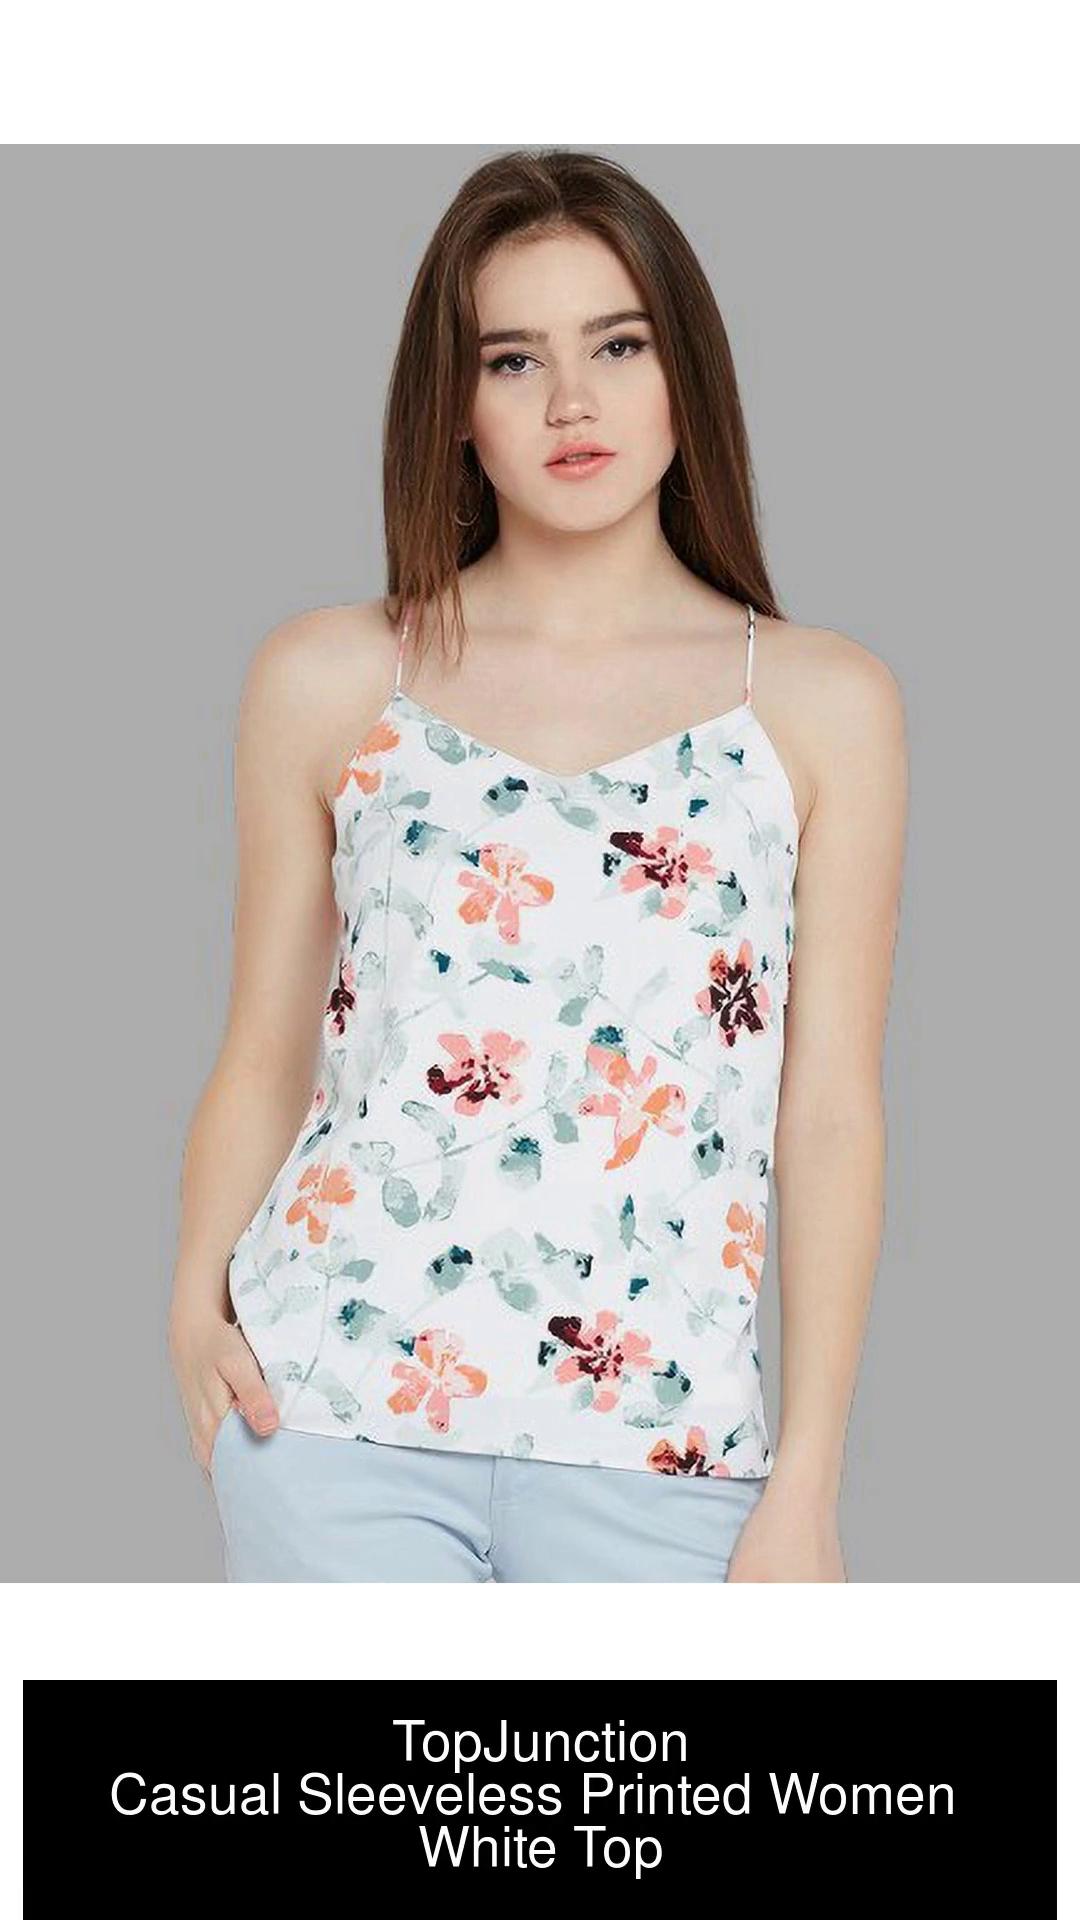 White Sleeveless Tops for Women - Up to 70% off